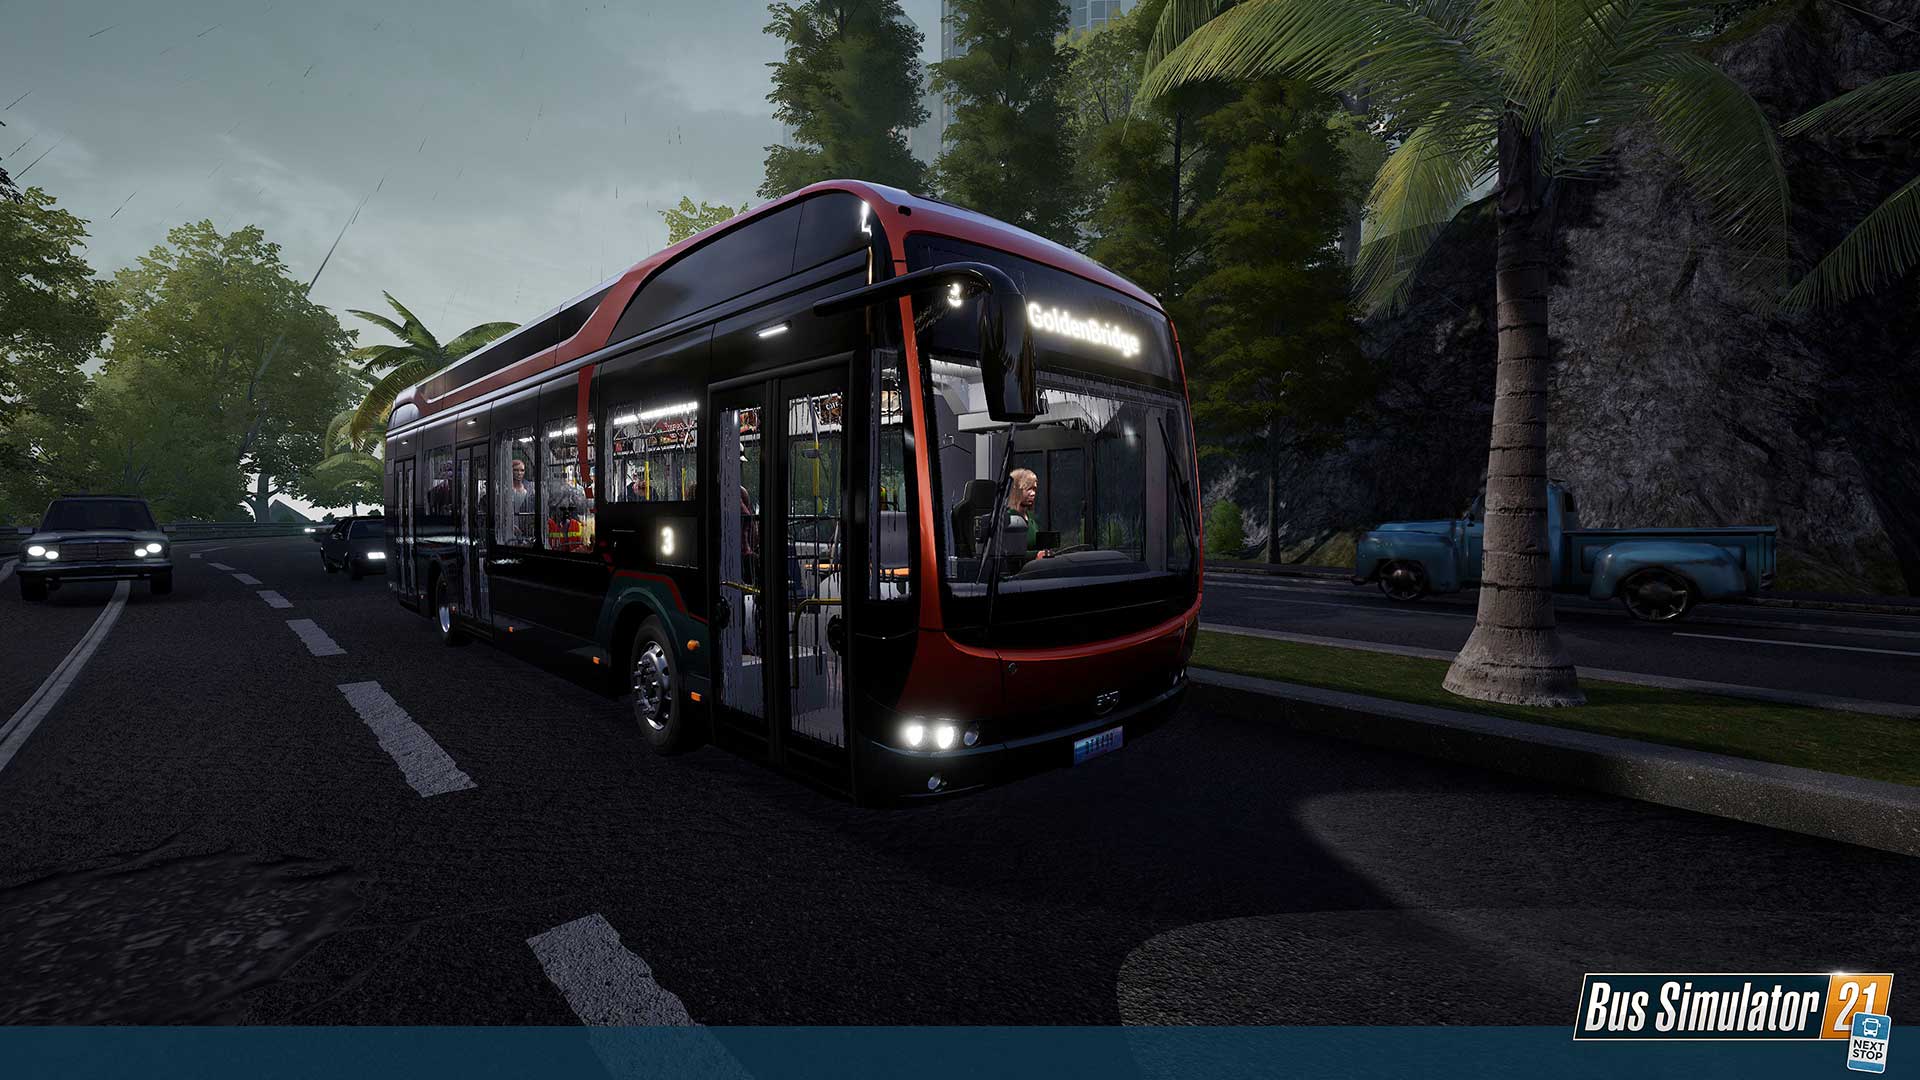 how much is bus simulator 18